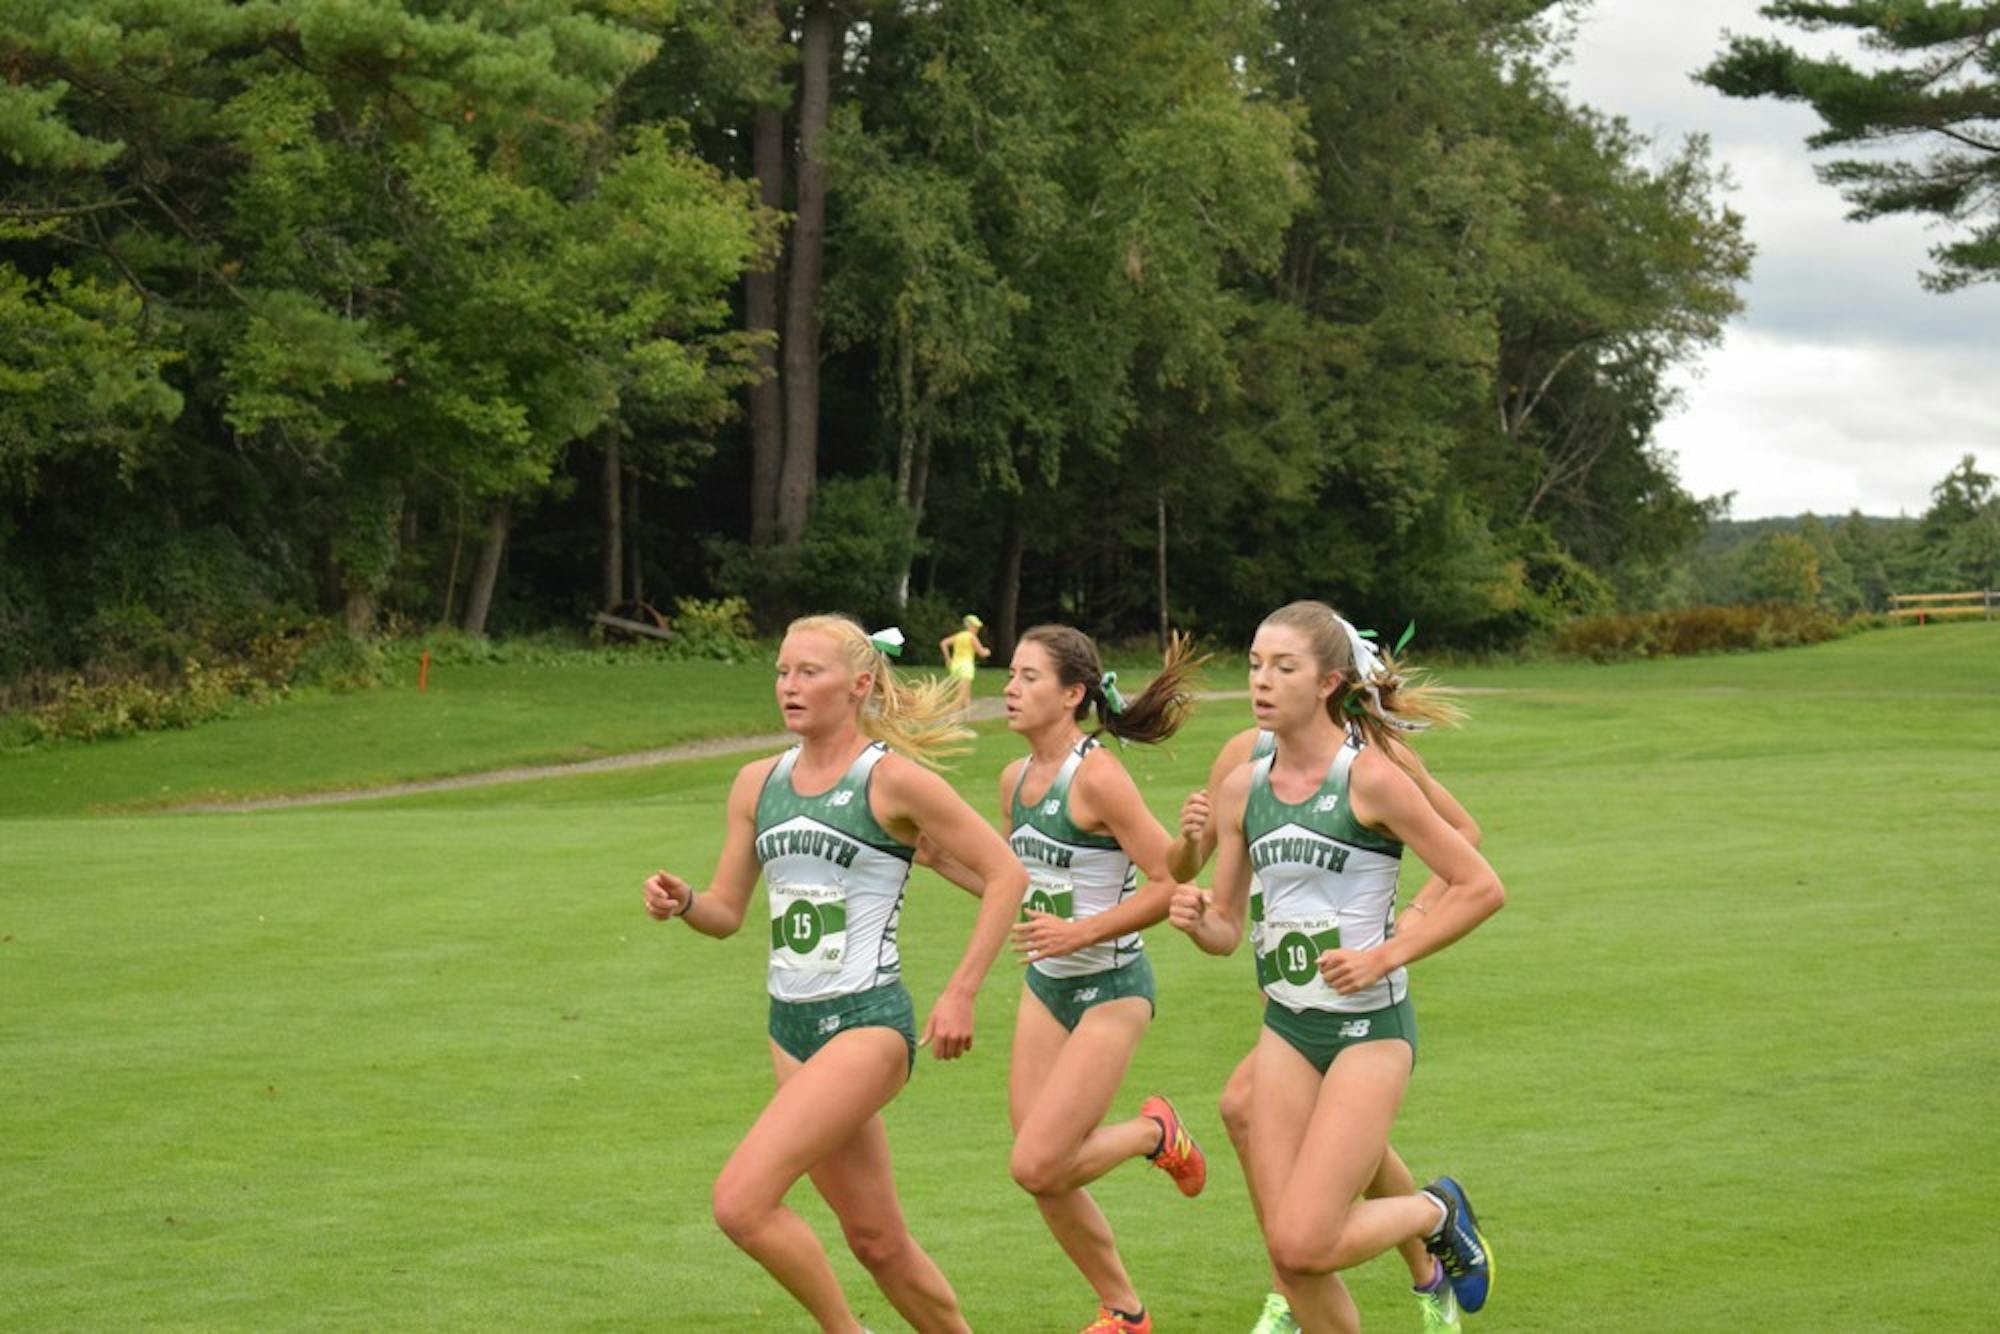 Olivia Lantz ’19 (left) led the field to win the Maribel Sanchez Souther Invitational., completing the 6-kilometer course in 21:33.15.